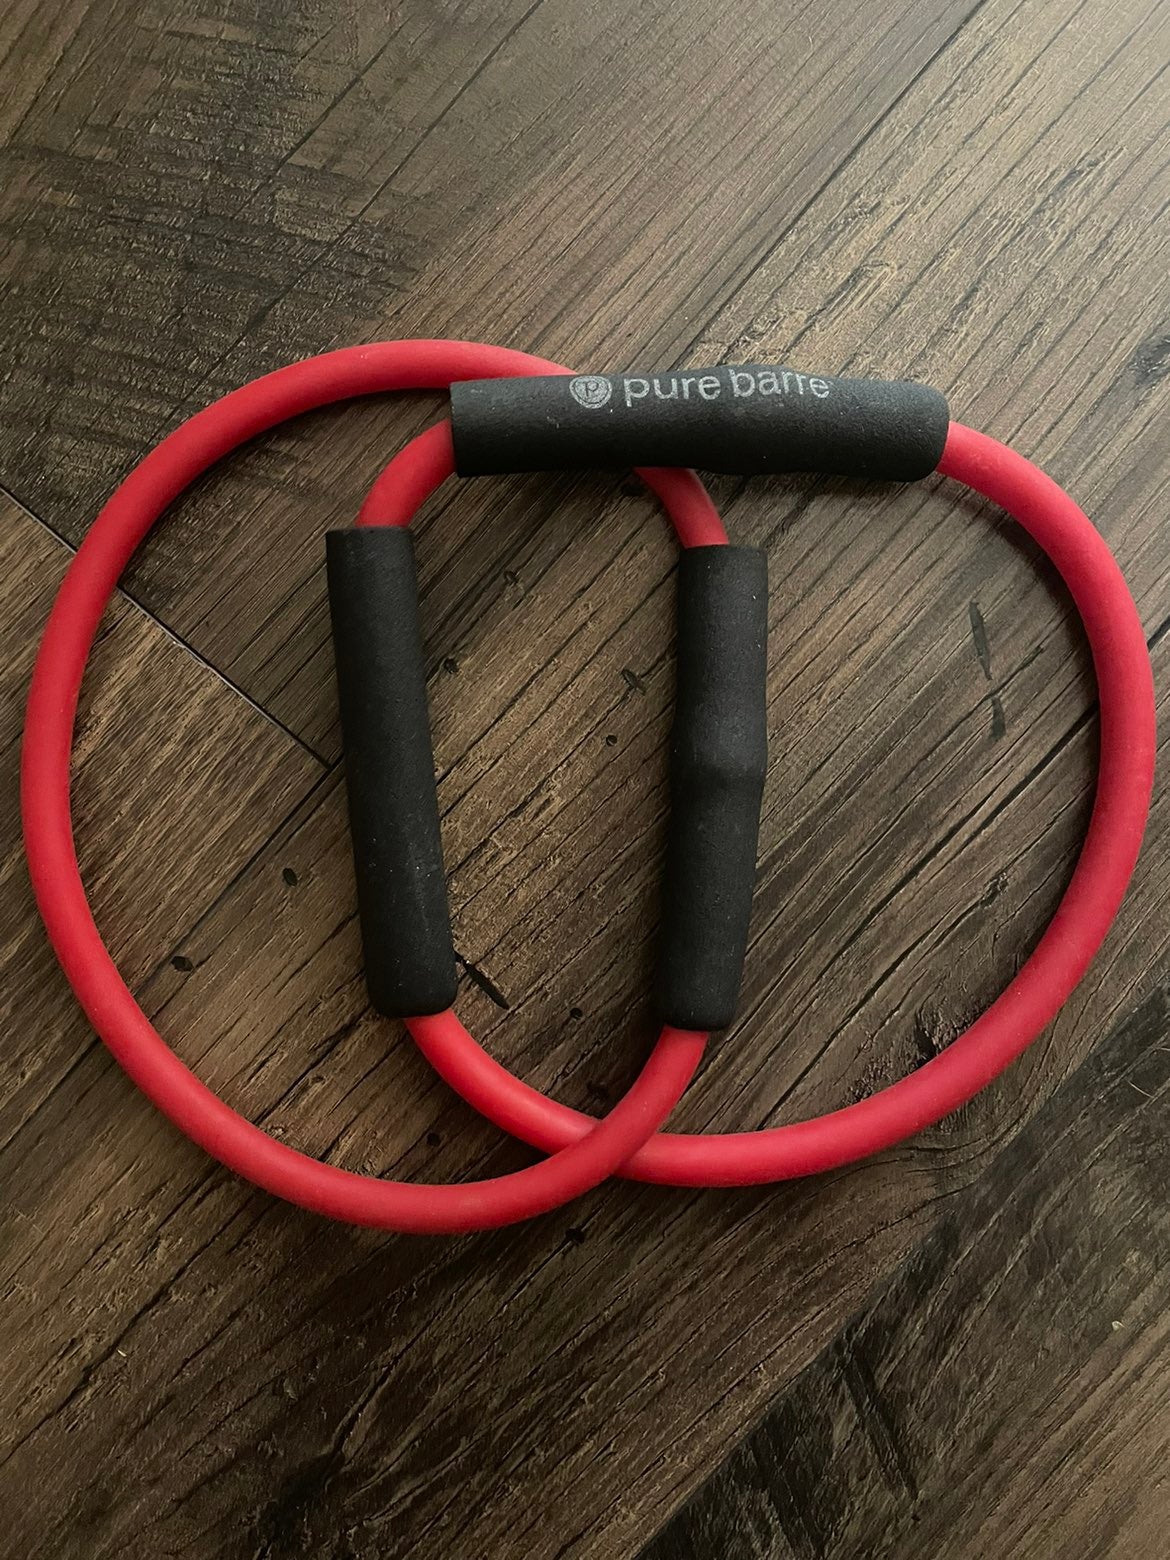 Pure Barre - Resistance Bands are the perfect piece of equipment